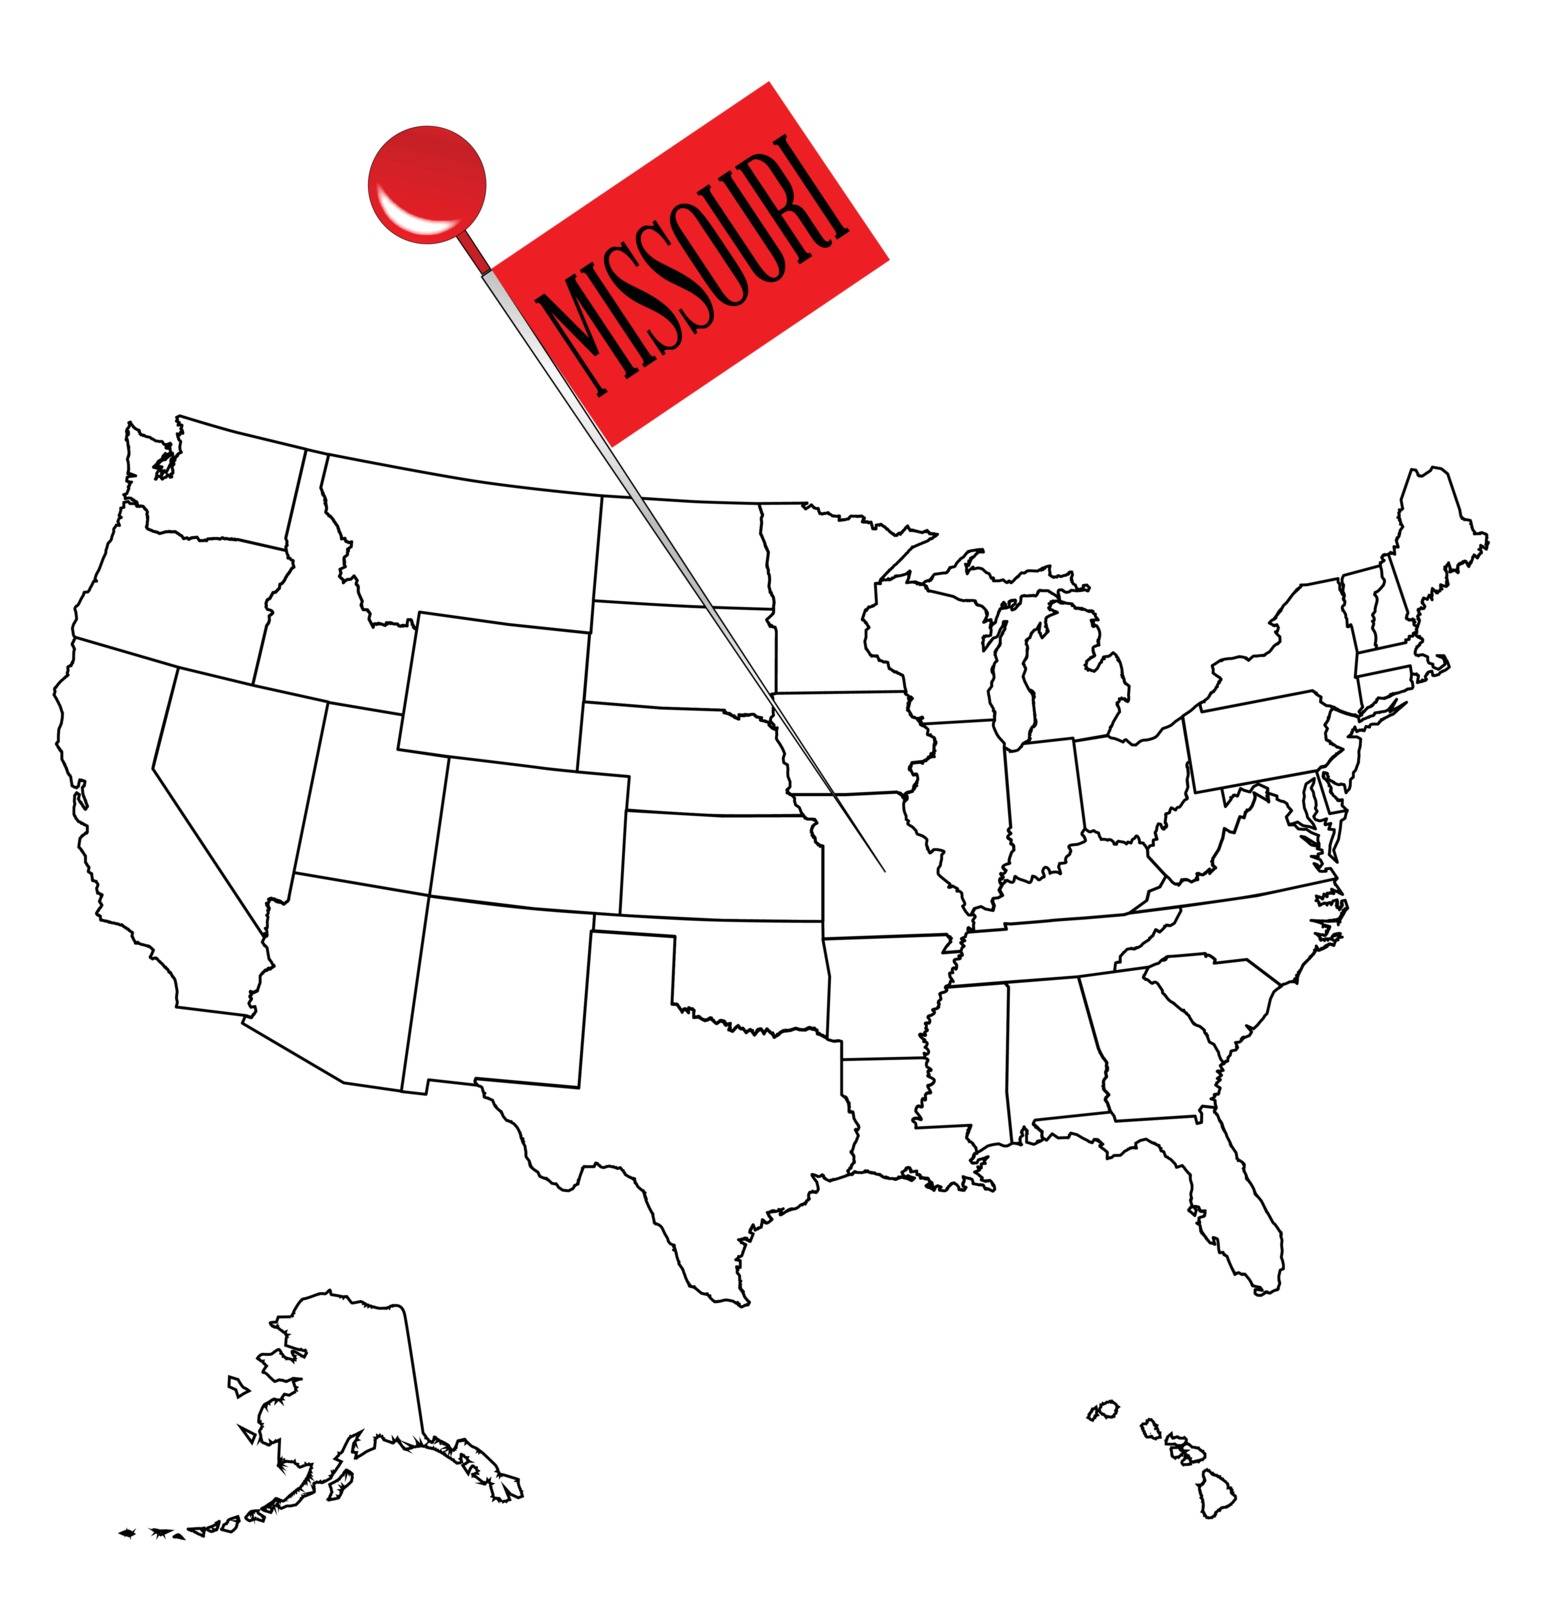 An outline map of USA with a knob pin in the state of Missouri